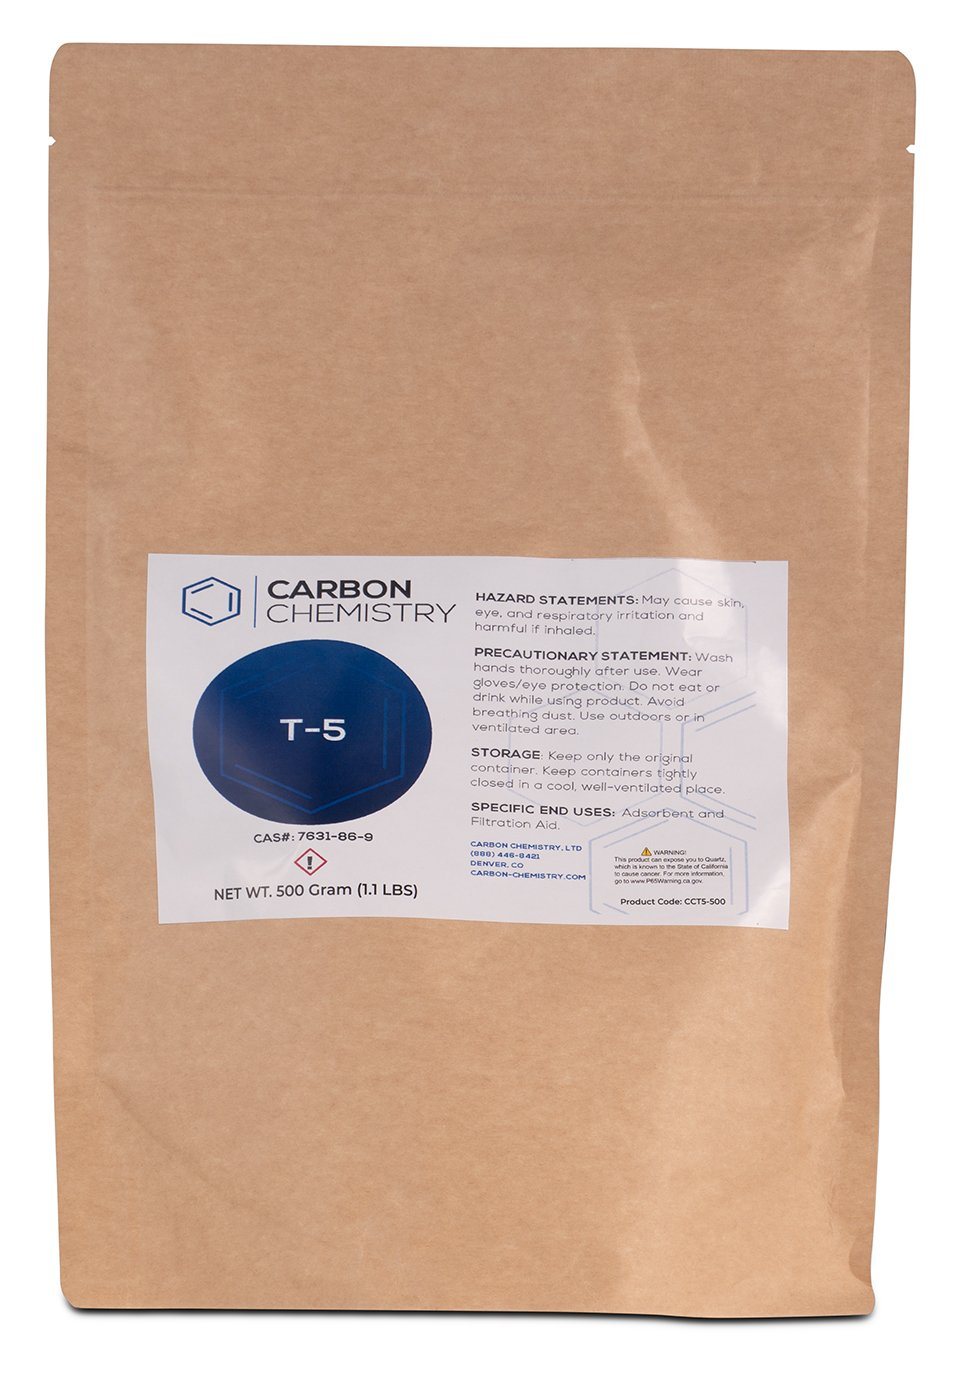 Carbon Chemistry LTD, Carbon Chemistry T-5™ Neutral Activated Bentonite Clay